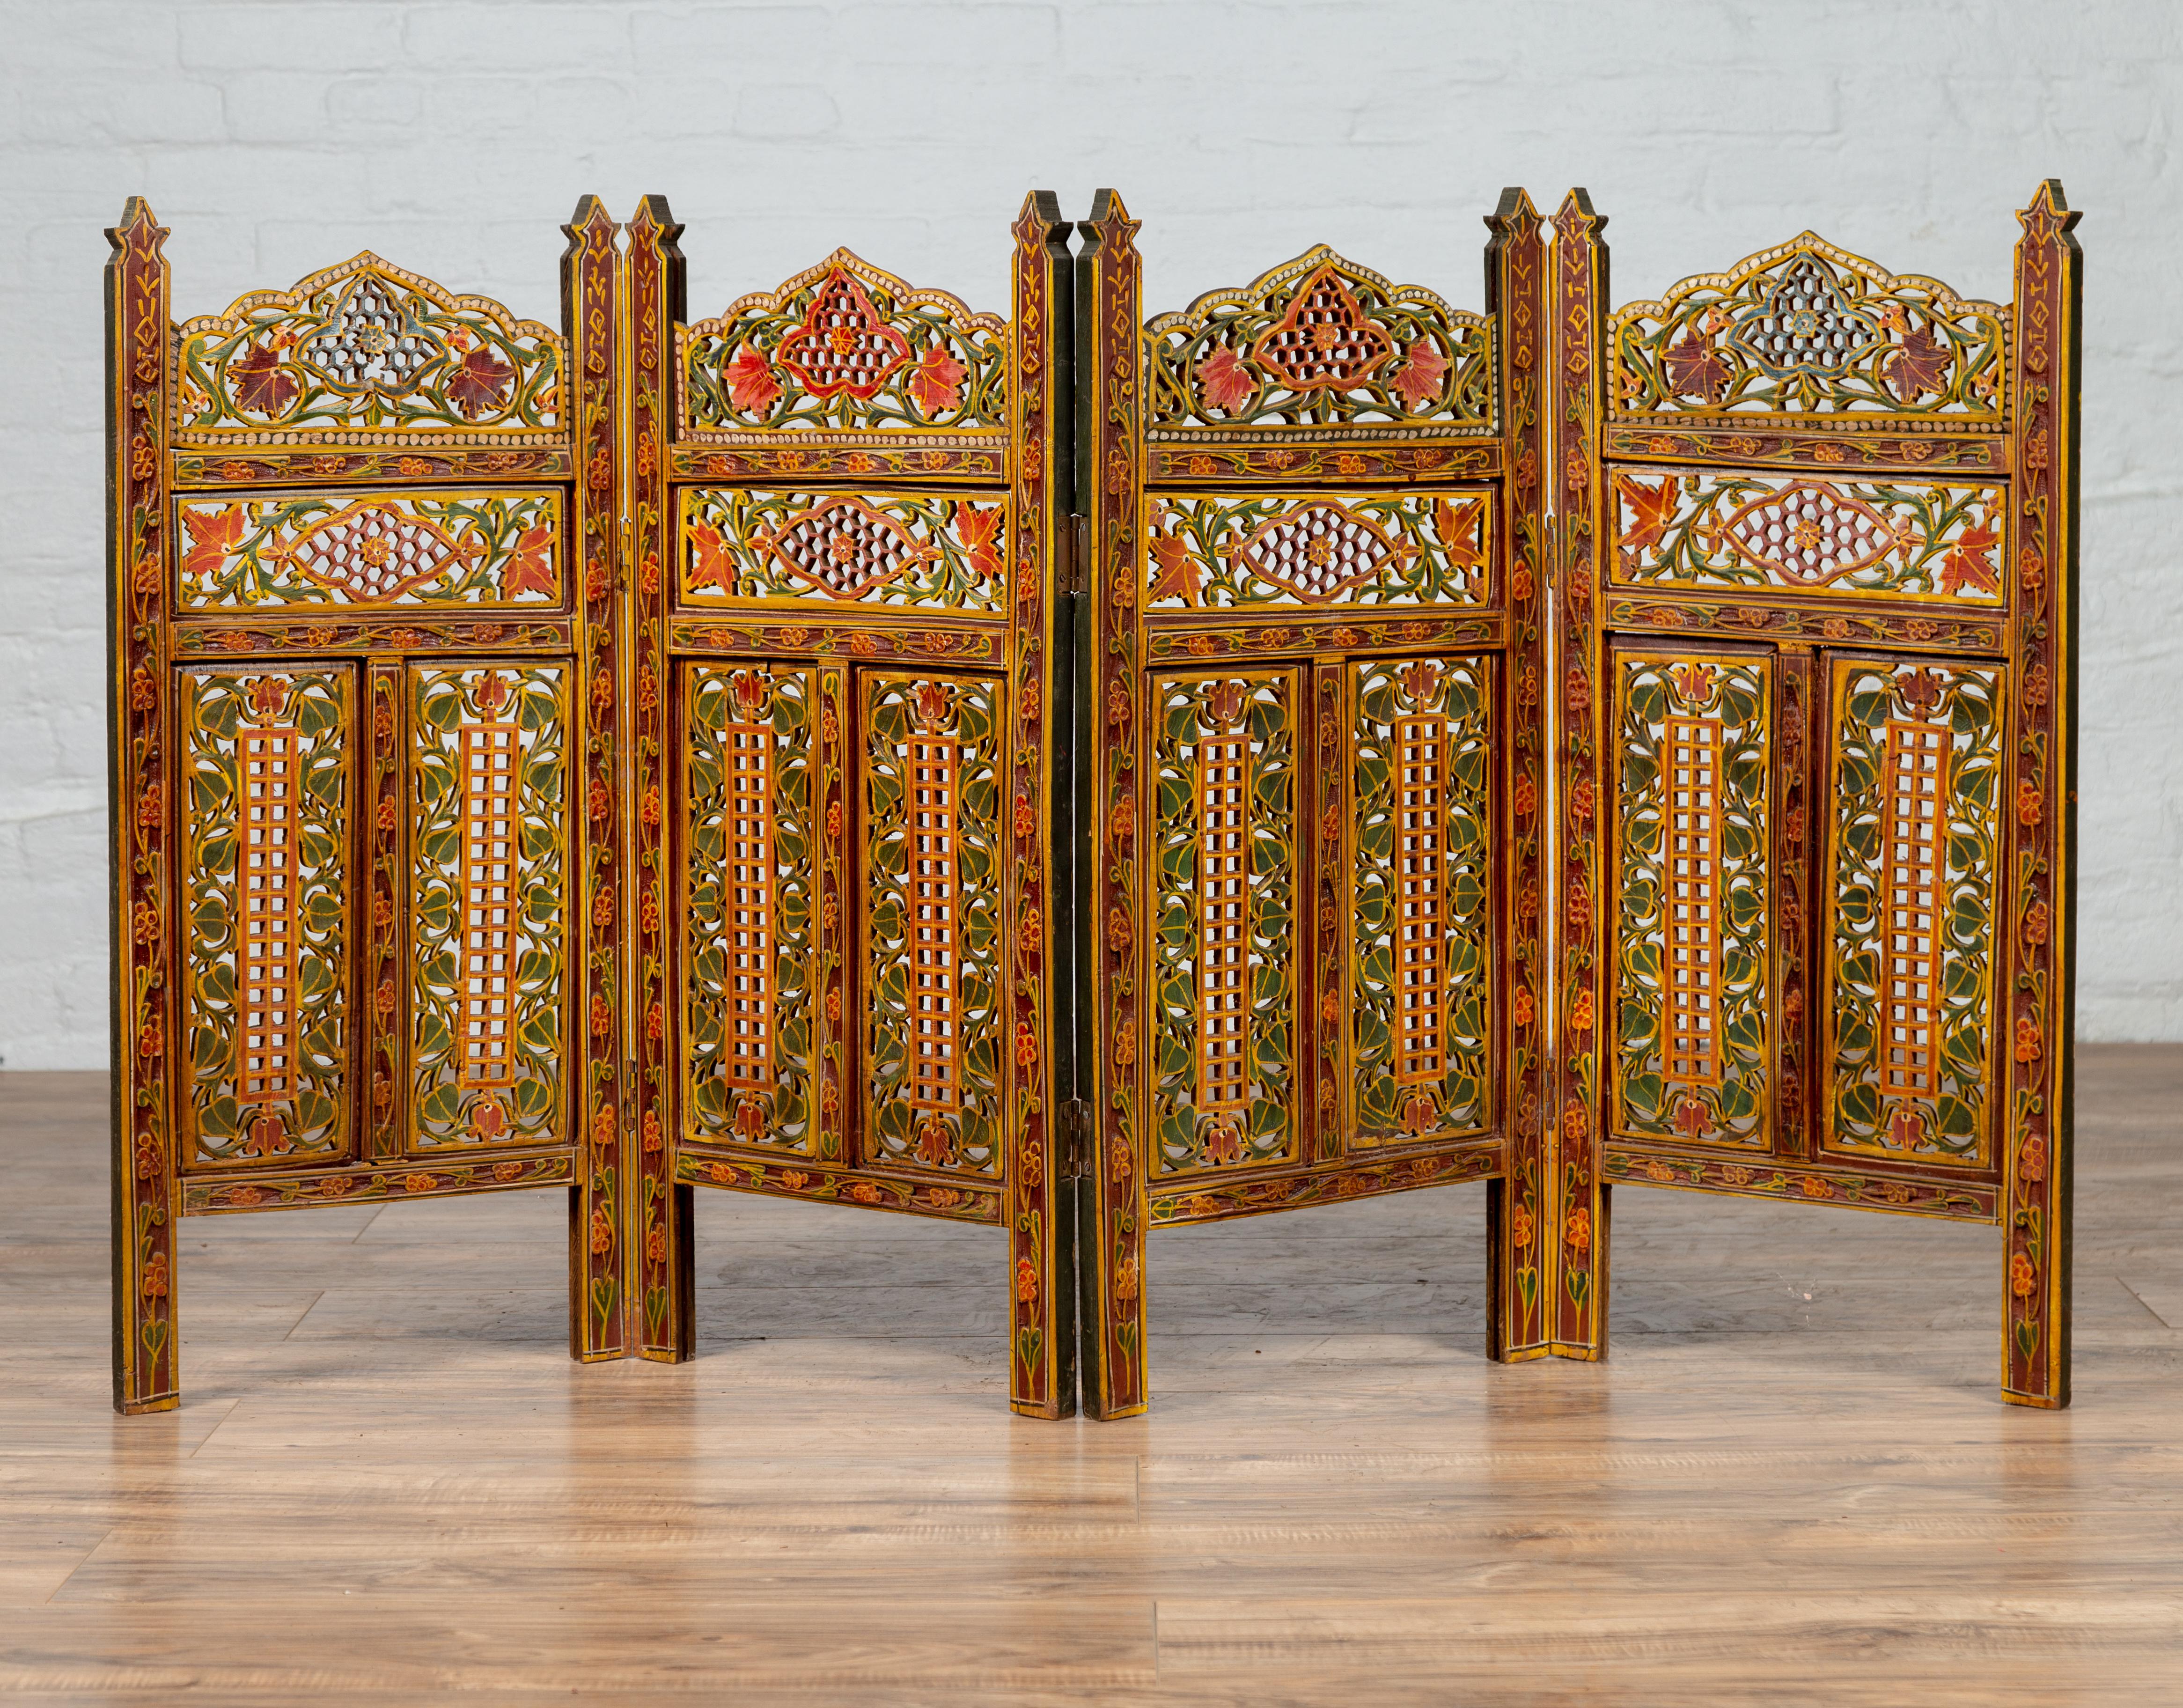 A petite Indian vintage multi-color open fretwork four-panel screen, hand carved and hand painted. Born in India during the midcentury period, this small and exquisite screen features four folding panels, each adorned with a mesmerizing décor of